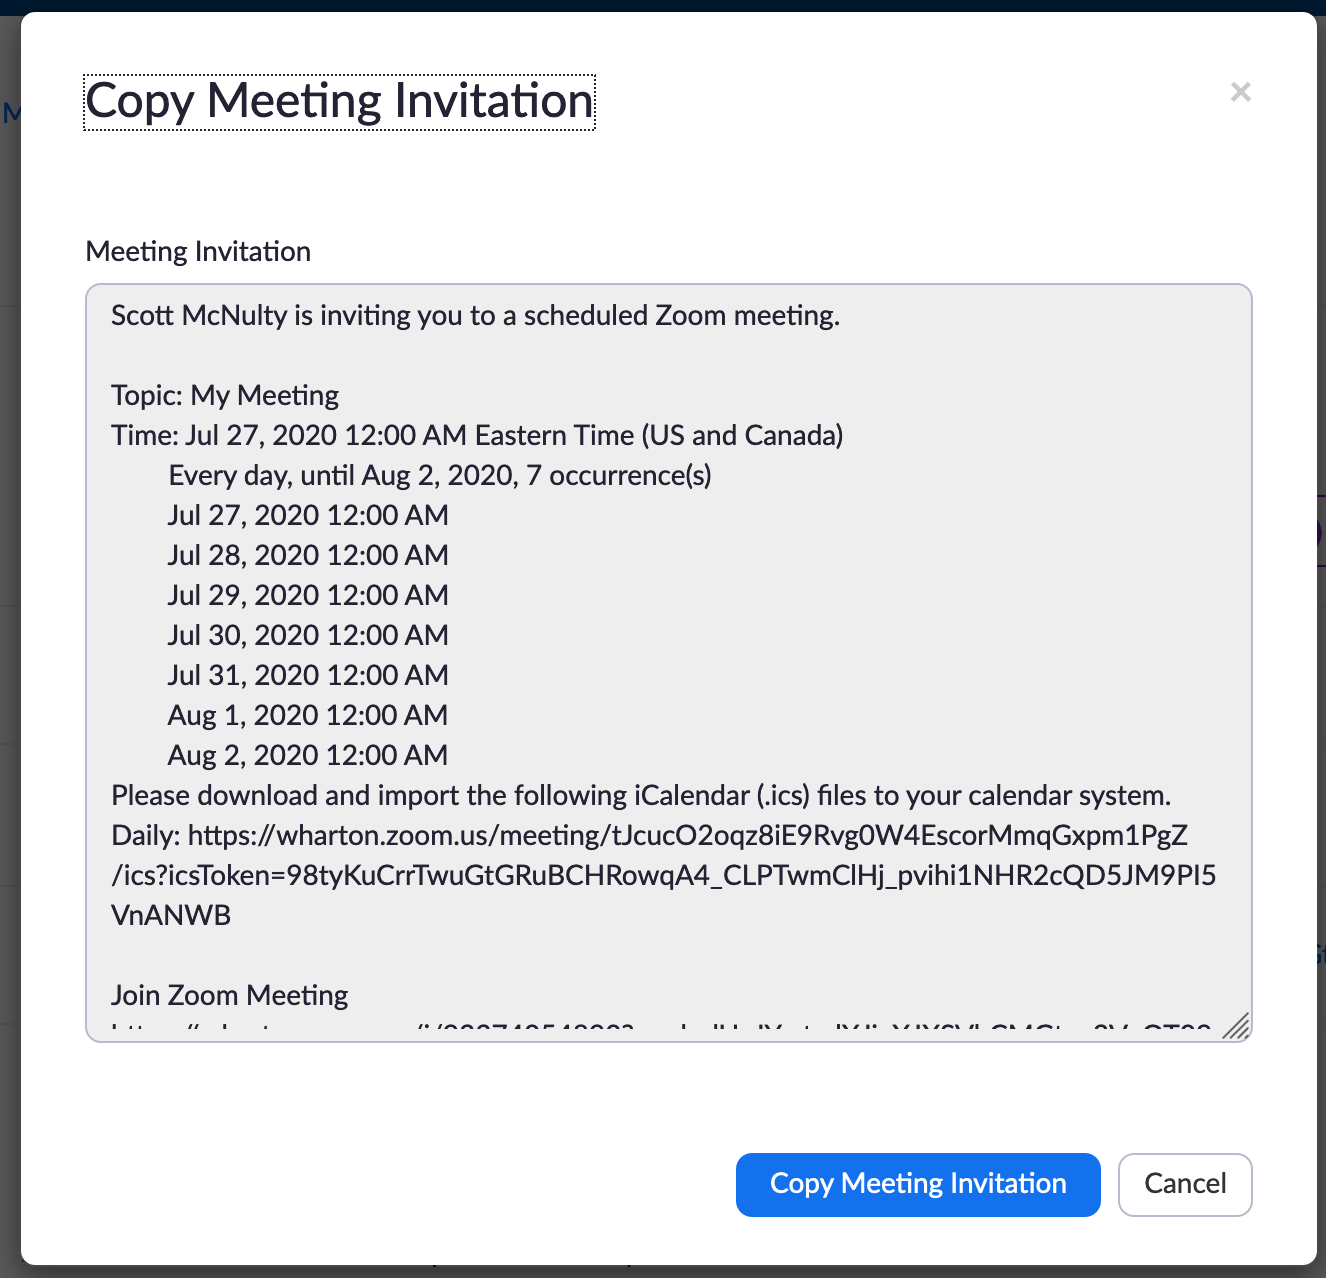 Copying a meeting invitation